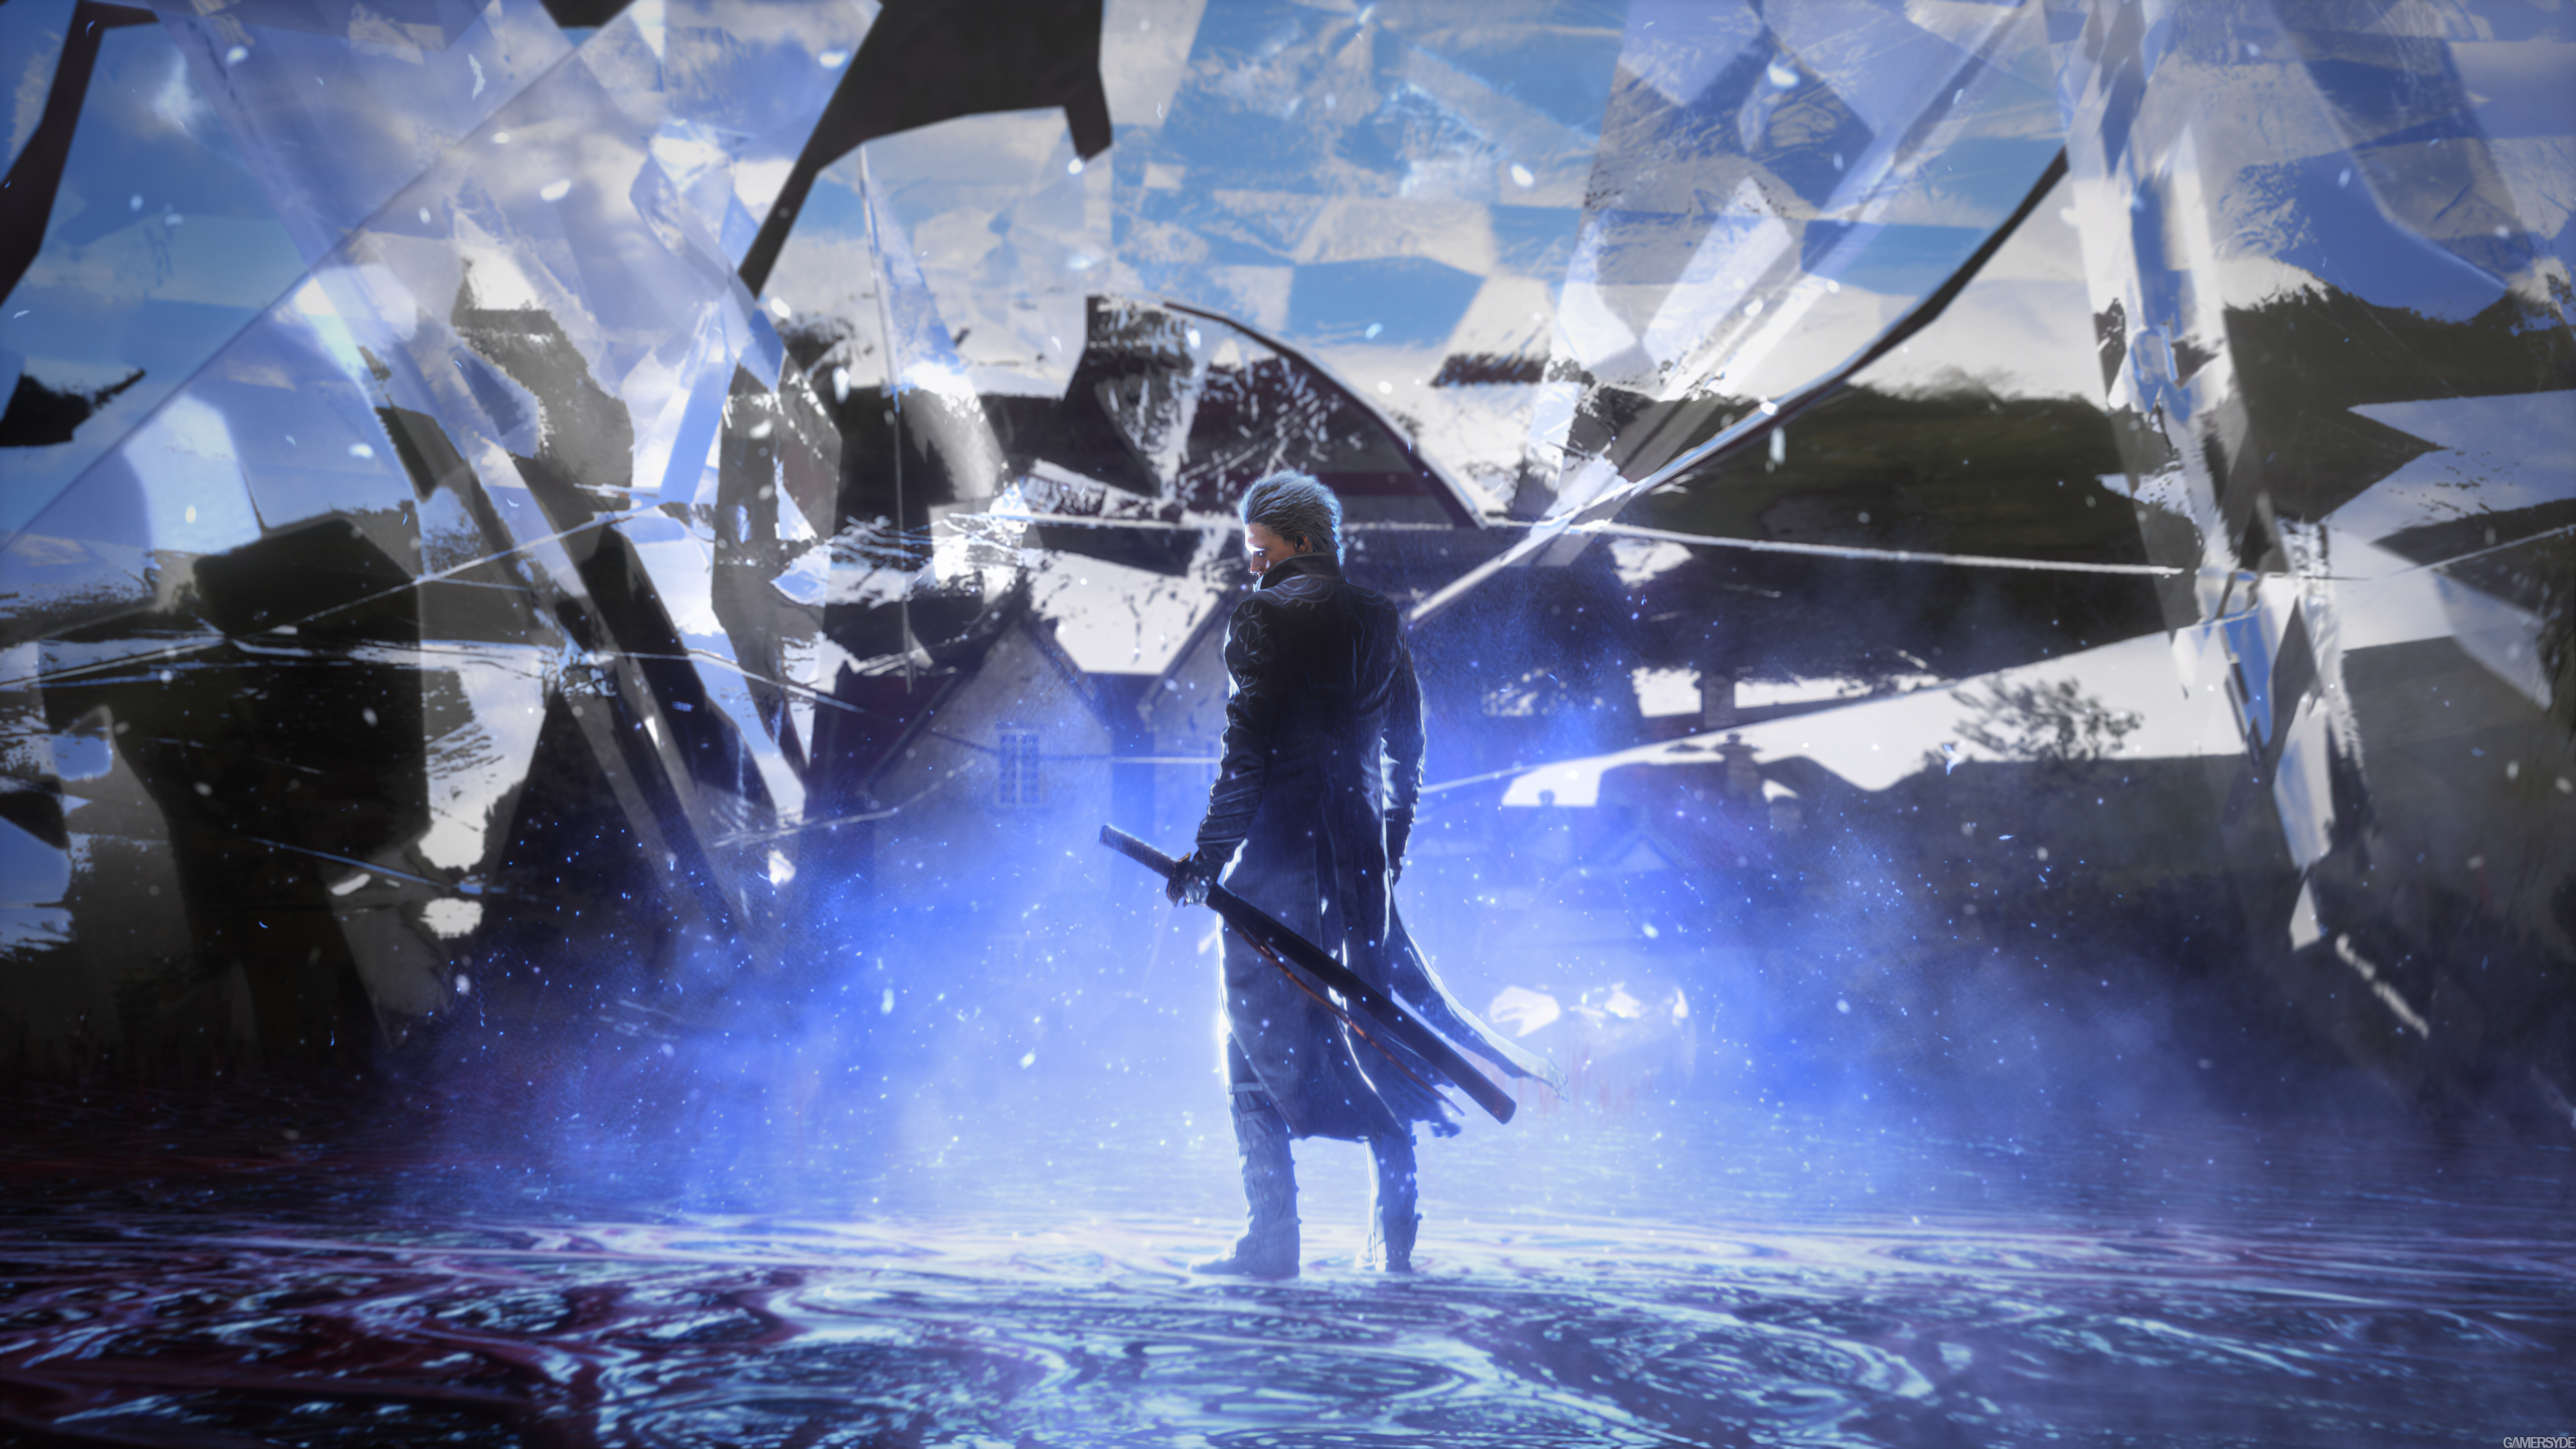 devil may cry 5 deluxe edition download mega